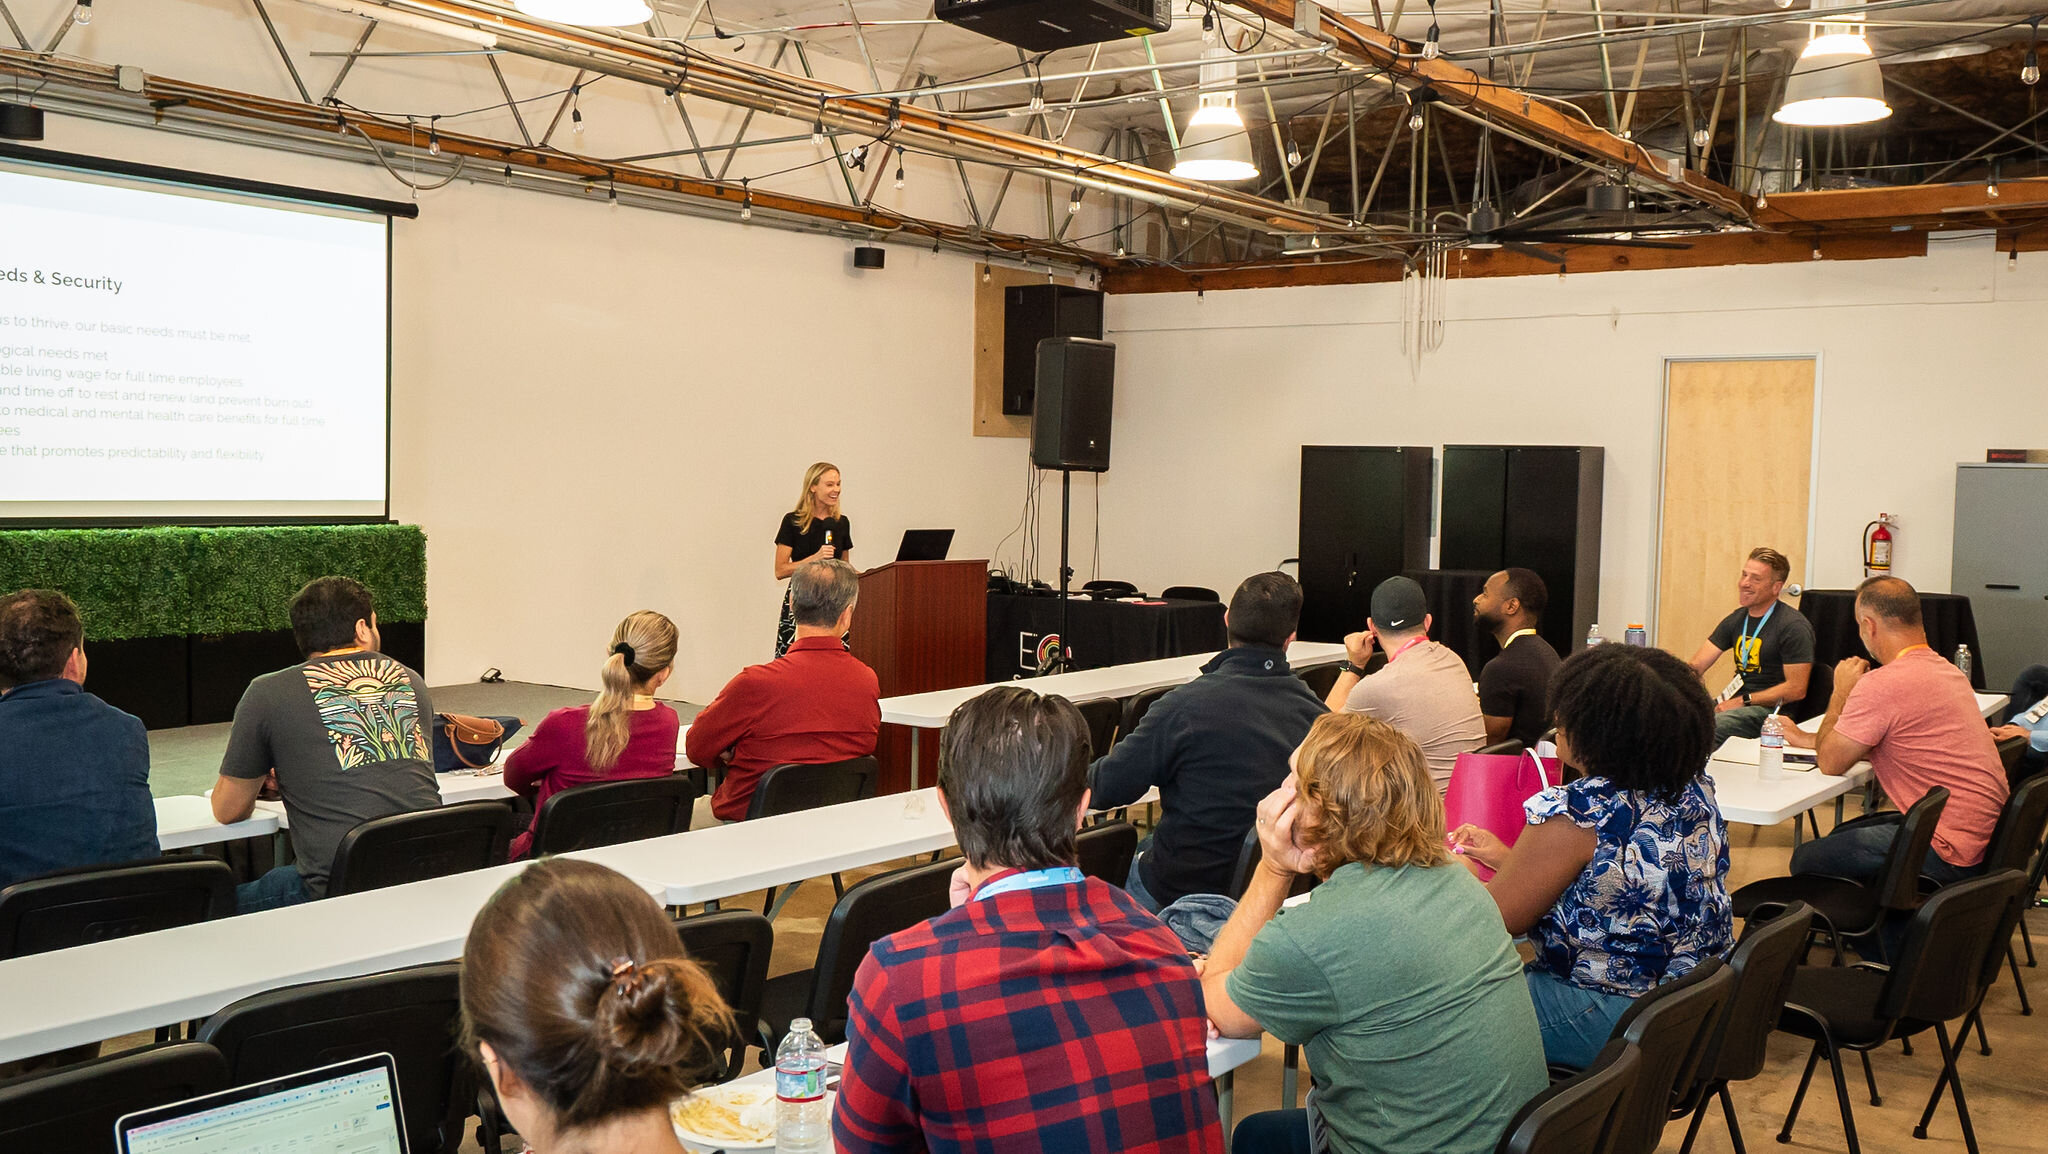 Back in October 2023 I spoke to a group of entrepreneurs at @eosandiego on Mental Health and their Business. The focus of my talk centered on inspiring business owners to create work environments that become engines for the mental health and wellbein